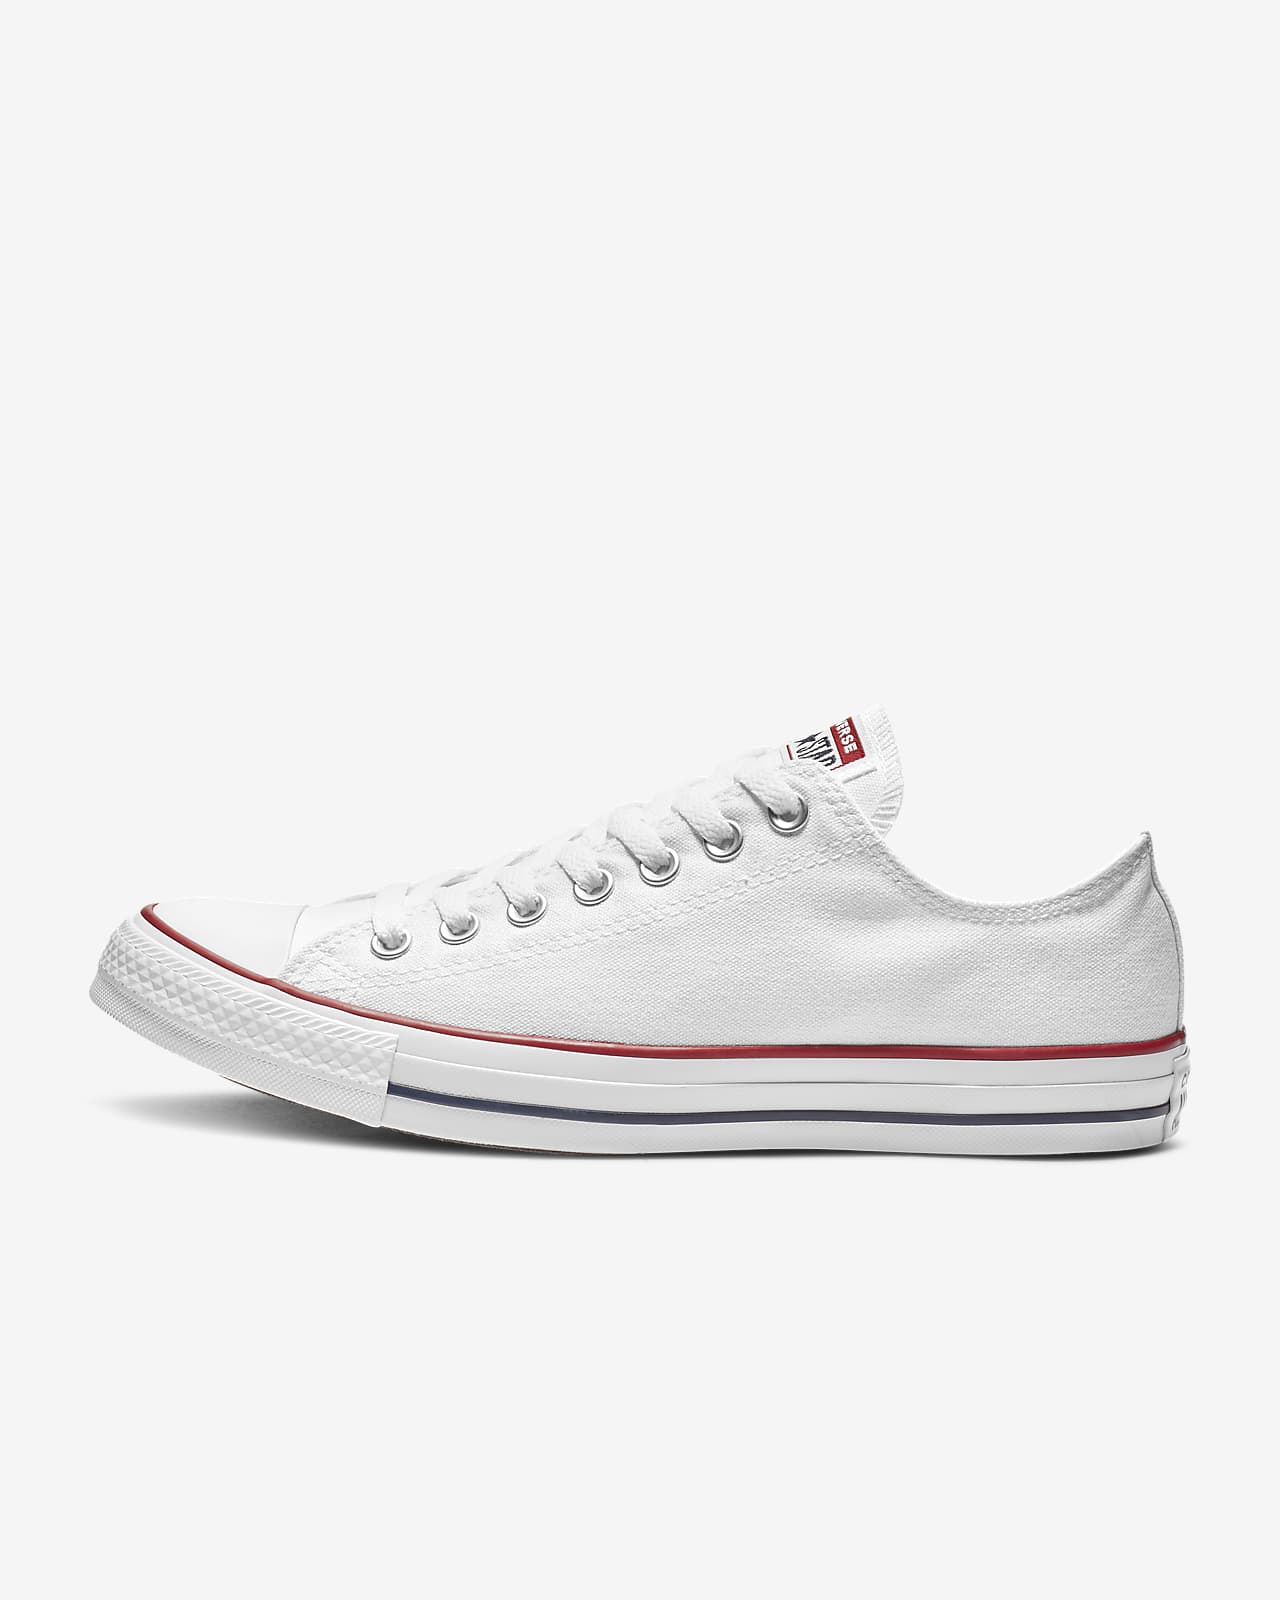 Geestig protest Ontwapening Converse Chuck Taylor All Star Low Top Unisex Shoe. Nike.com